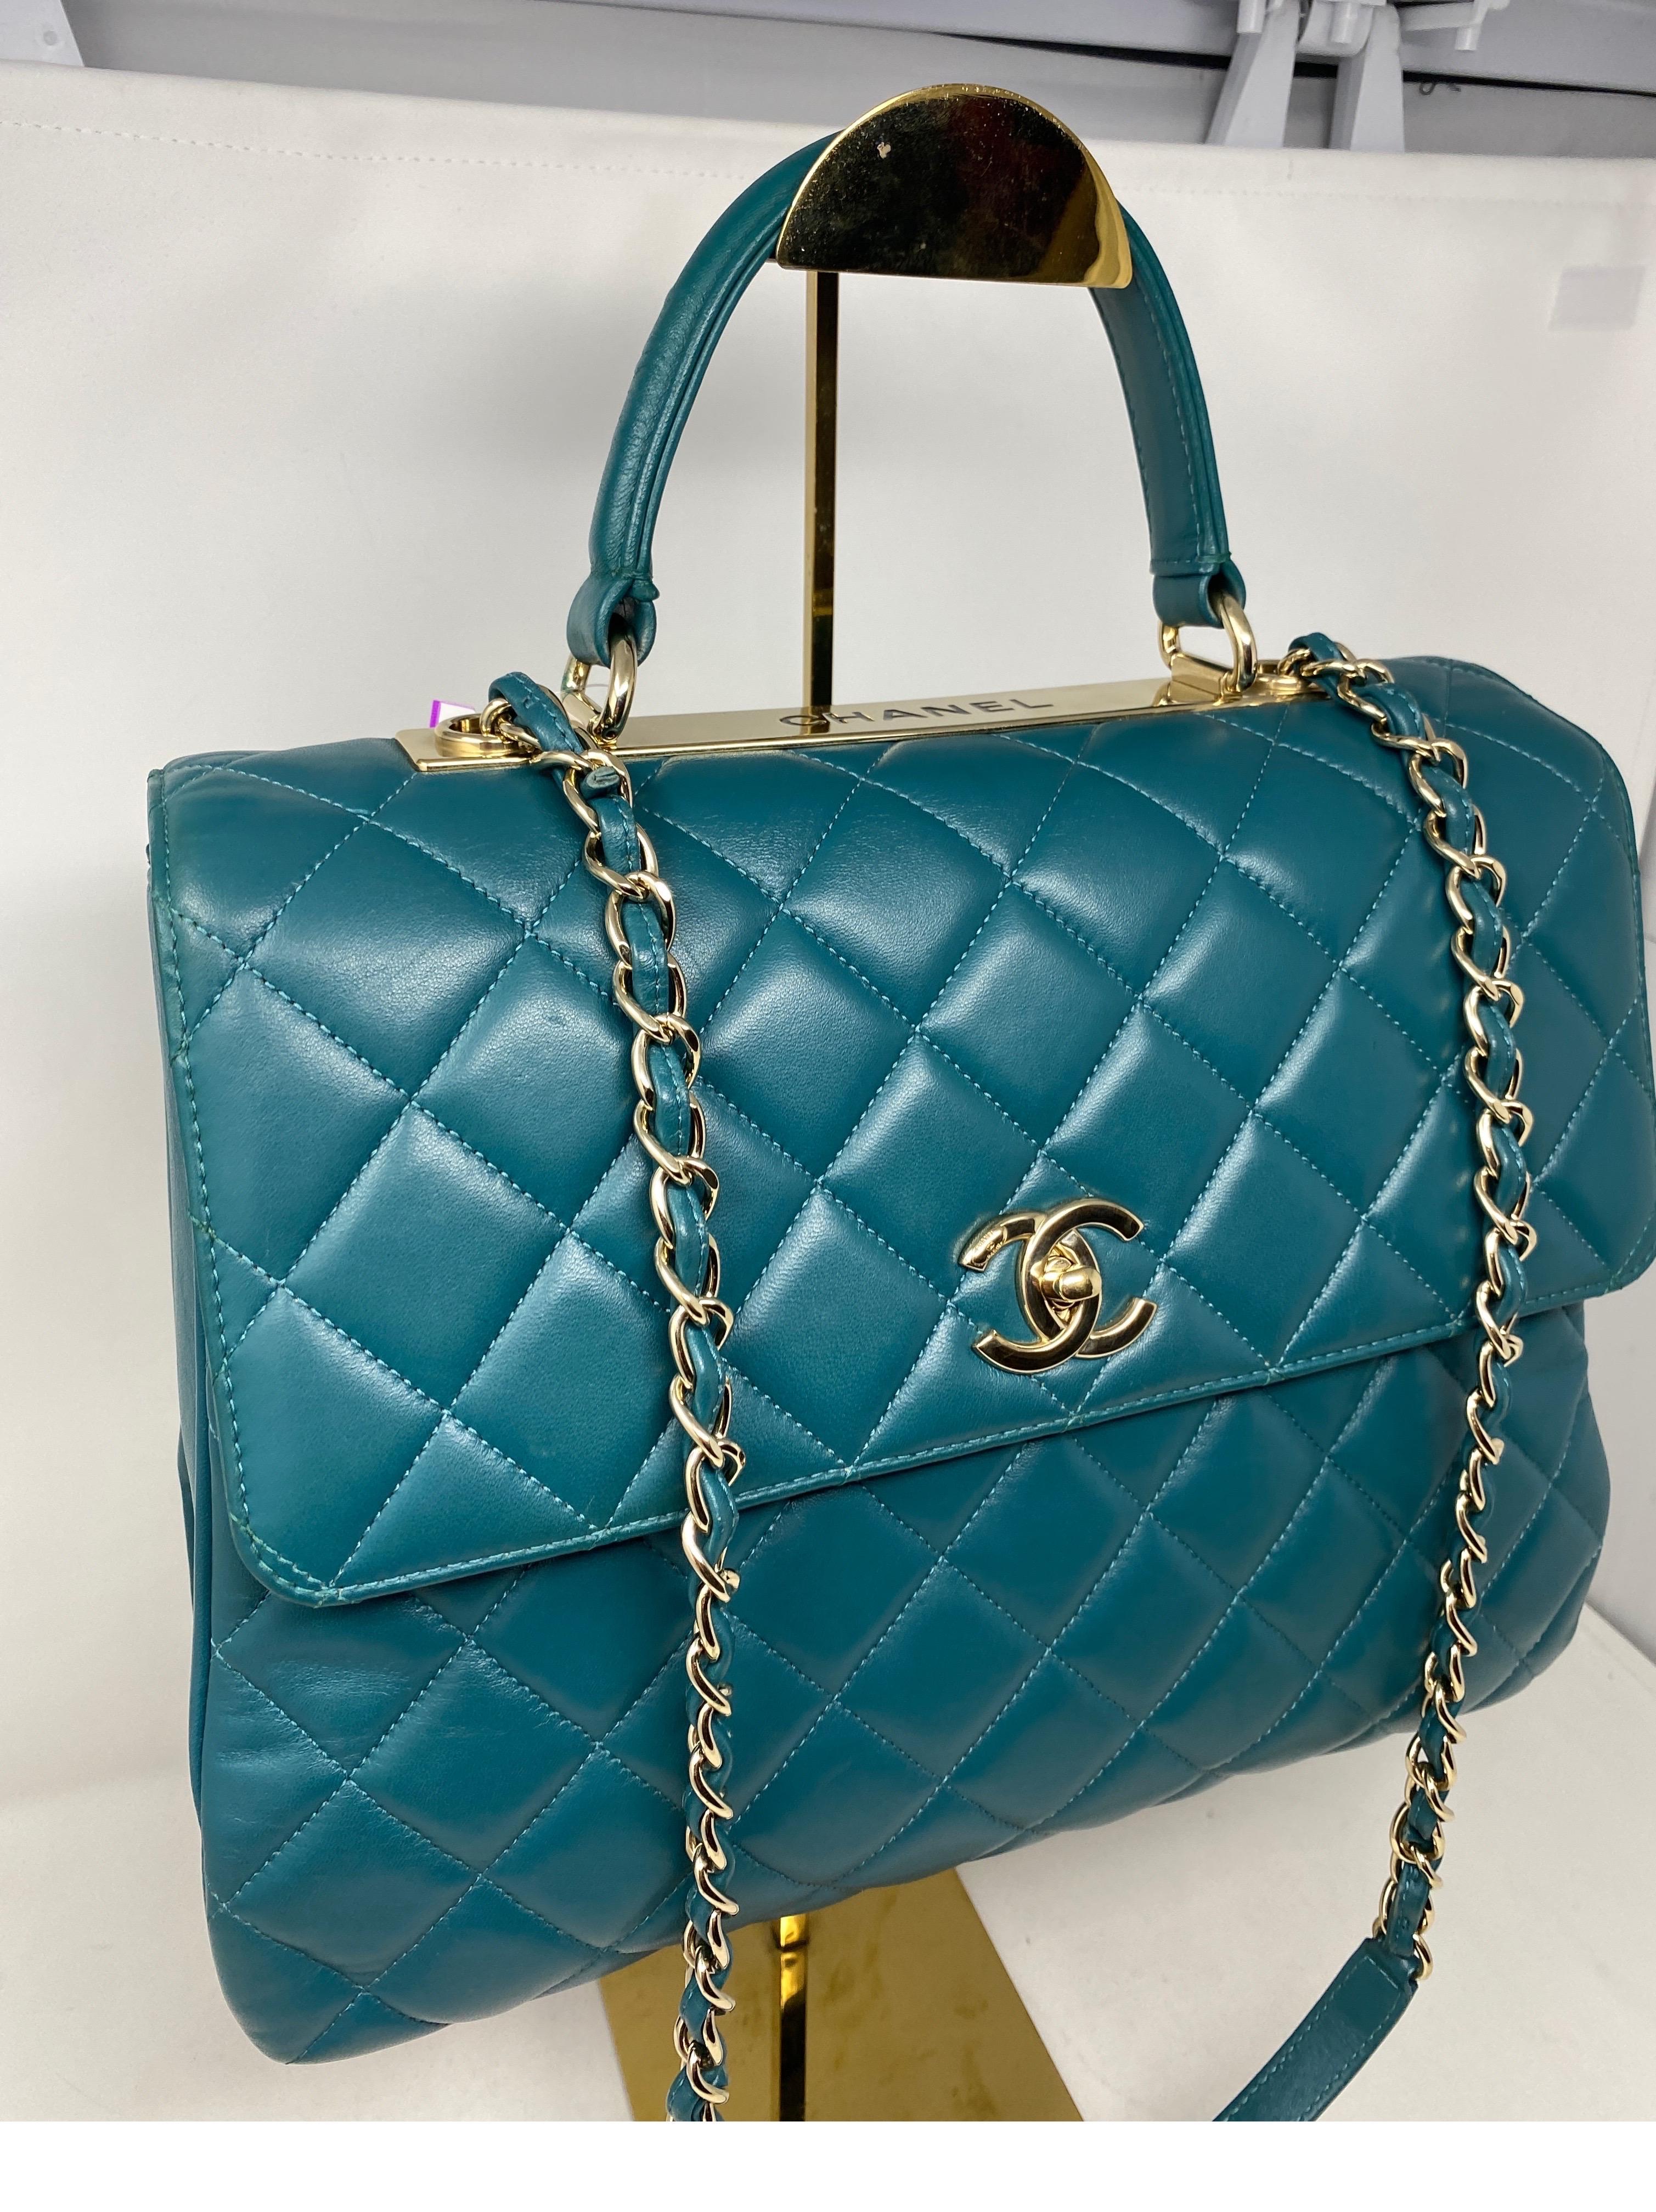 Chanel Trendy Teal Large Bag. Bright teal aqua color leather bag. Gold trendy plaque with gold hardware. Excellent like new condition. Clean maroon color leather interior. Authenticity card included. Guaranteed authentic. 